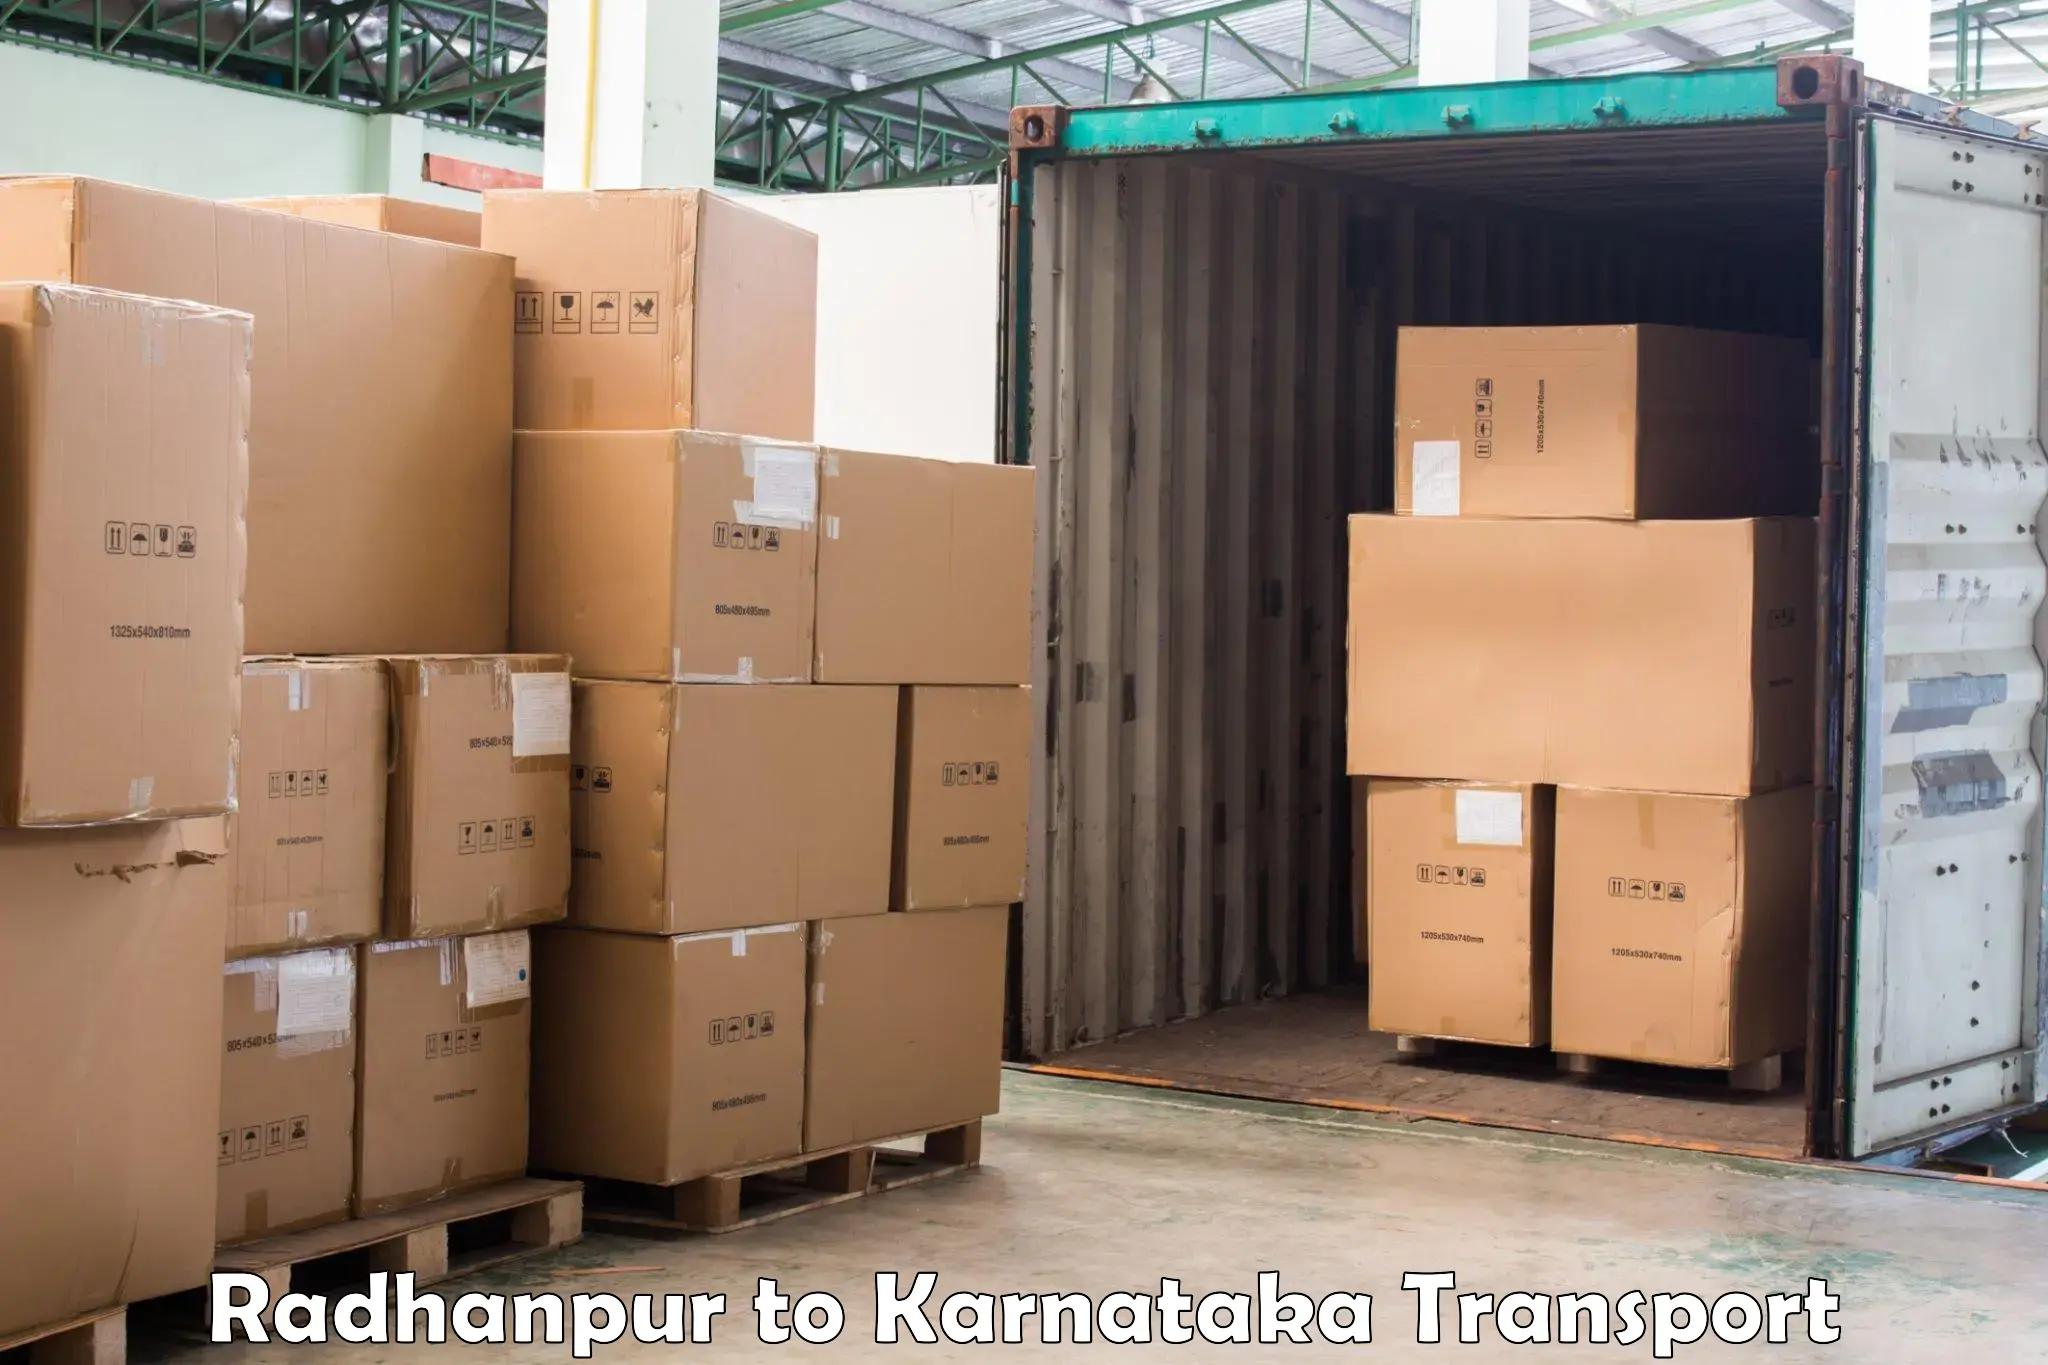 Air freight transport services Radhanpur to Hukkeri